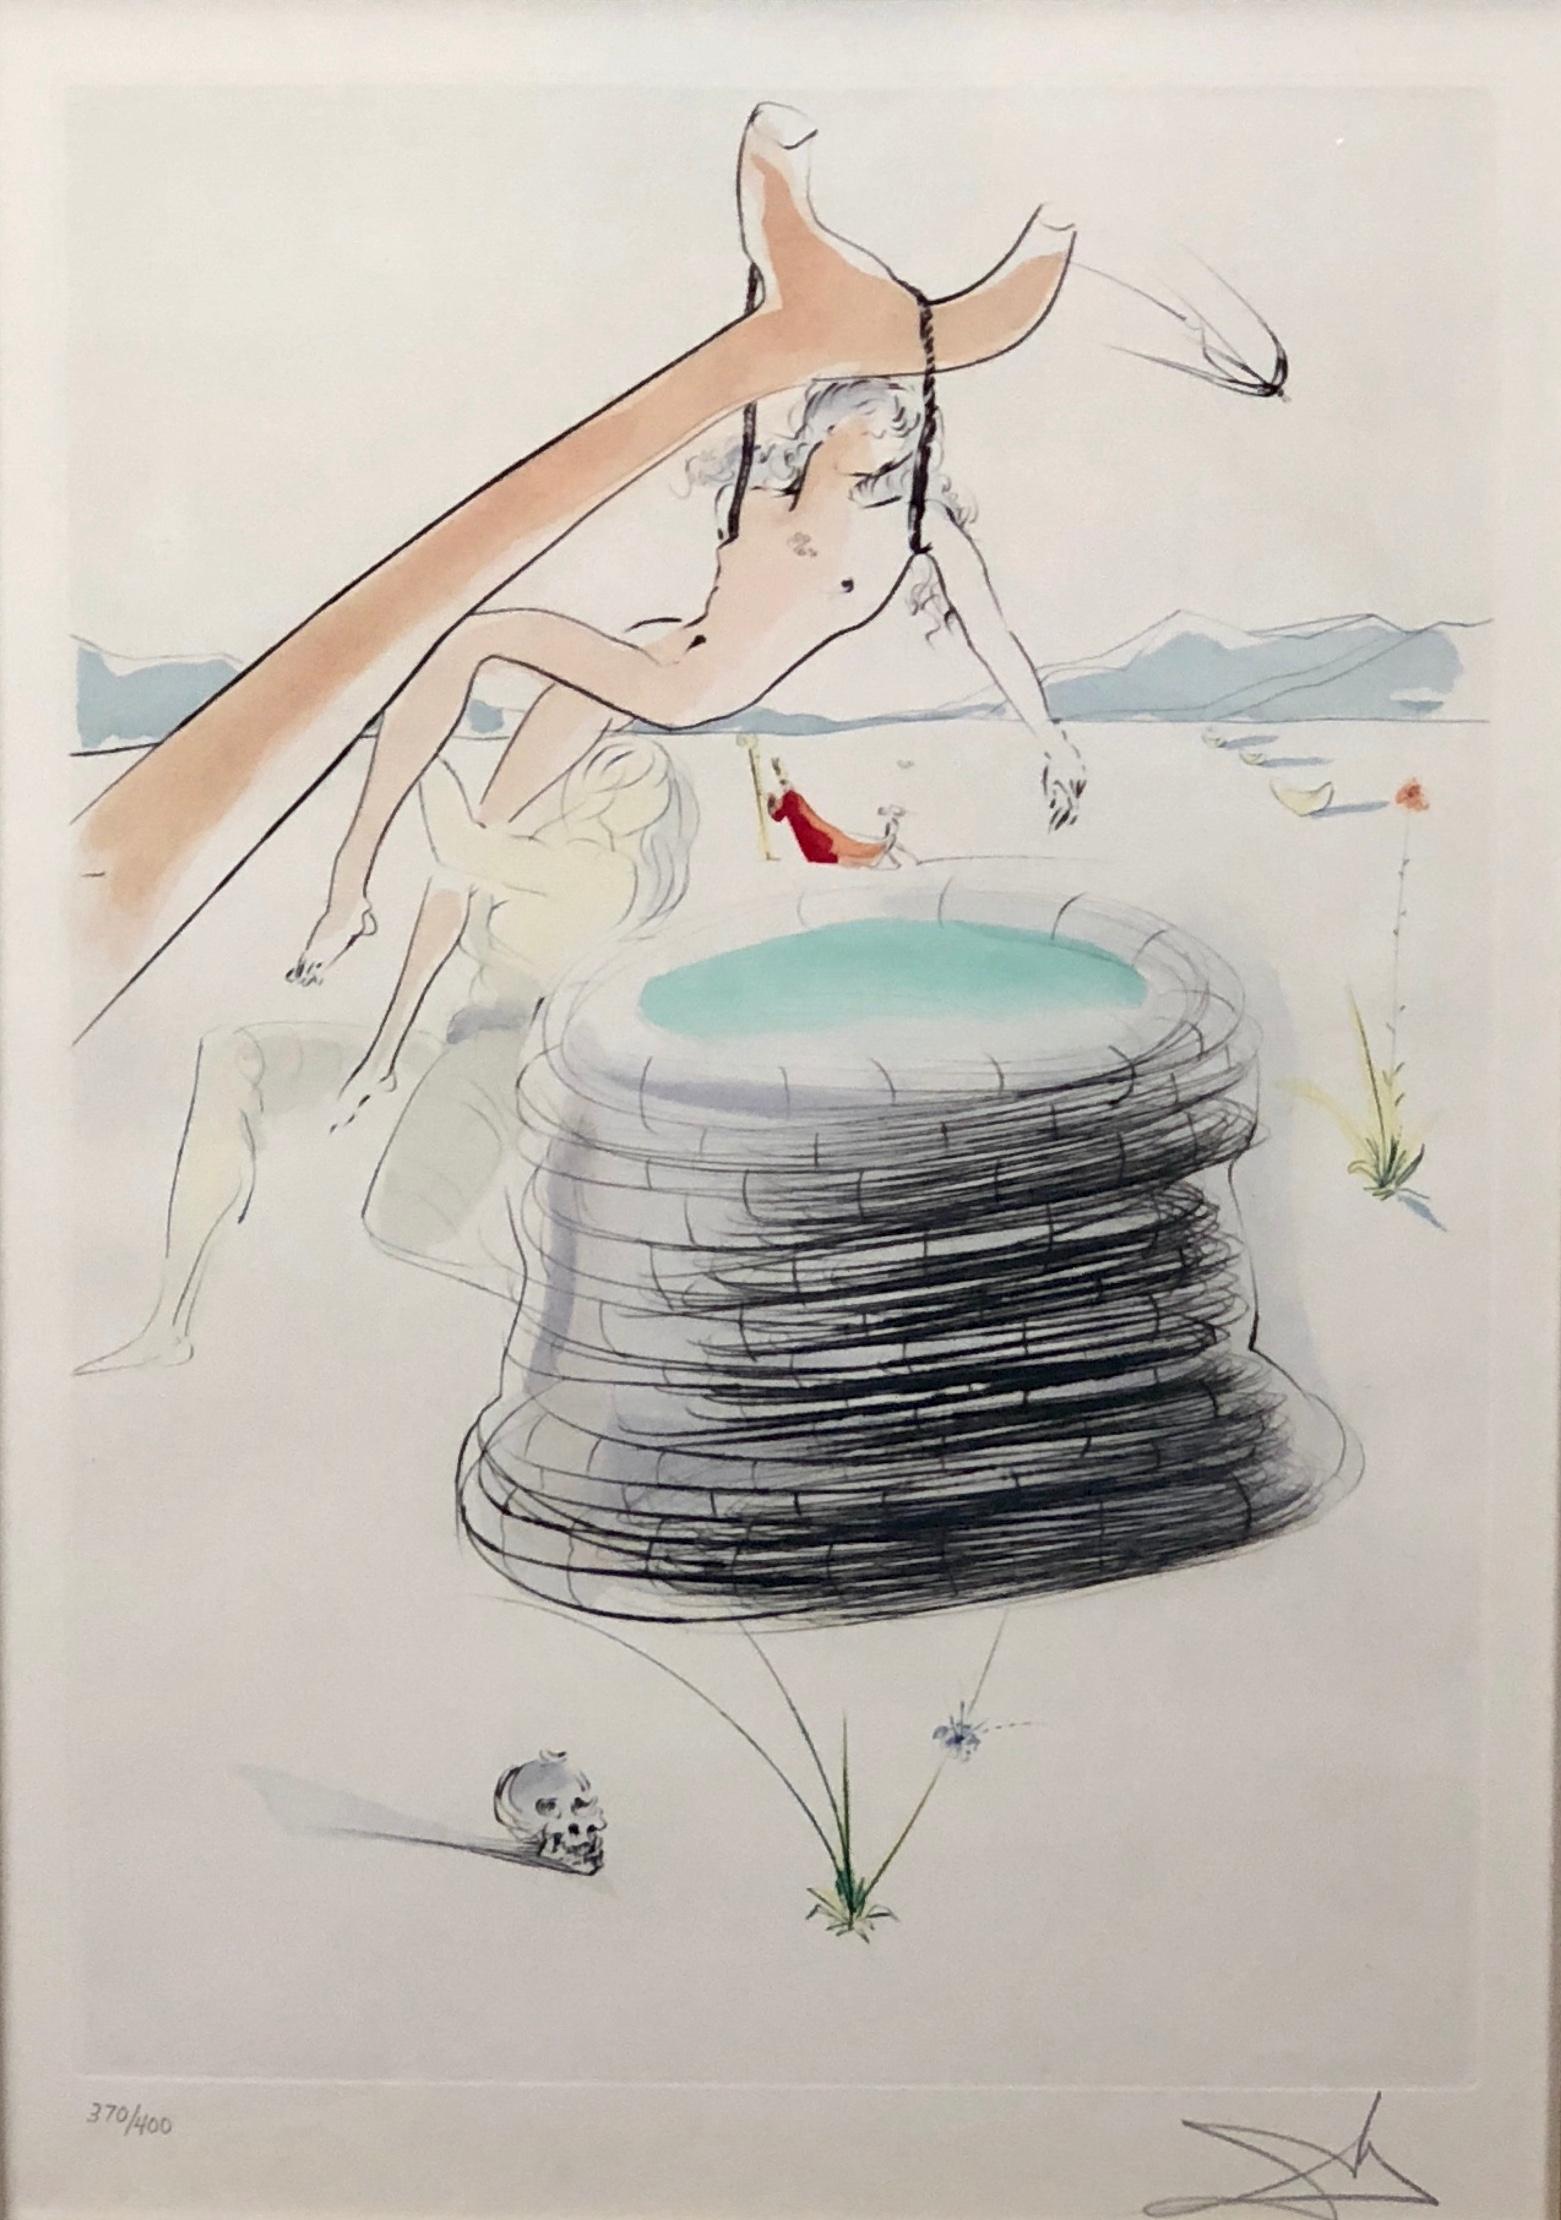 Salvador Dalí Figurative Print - Joseph (Joseph hung by his brethren) from Our Historical Heritage